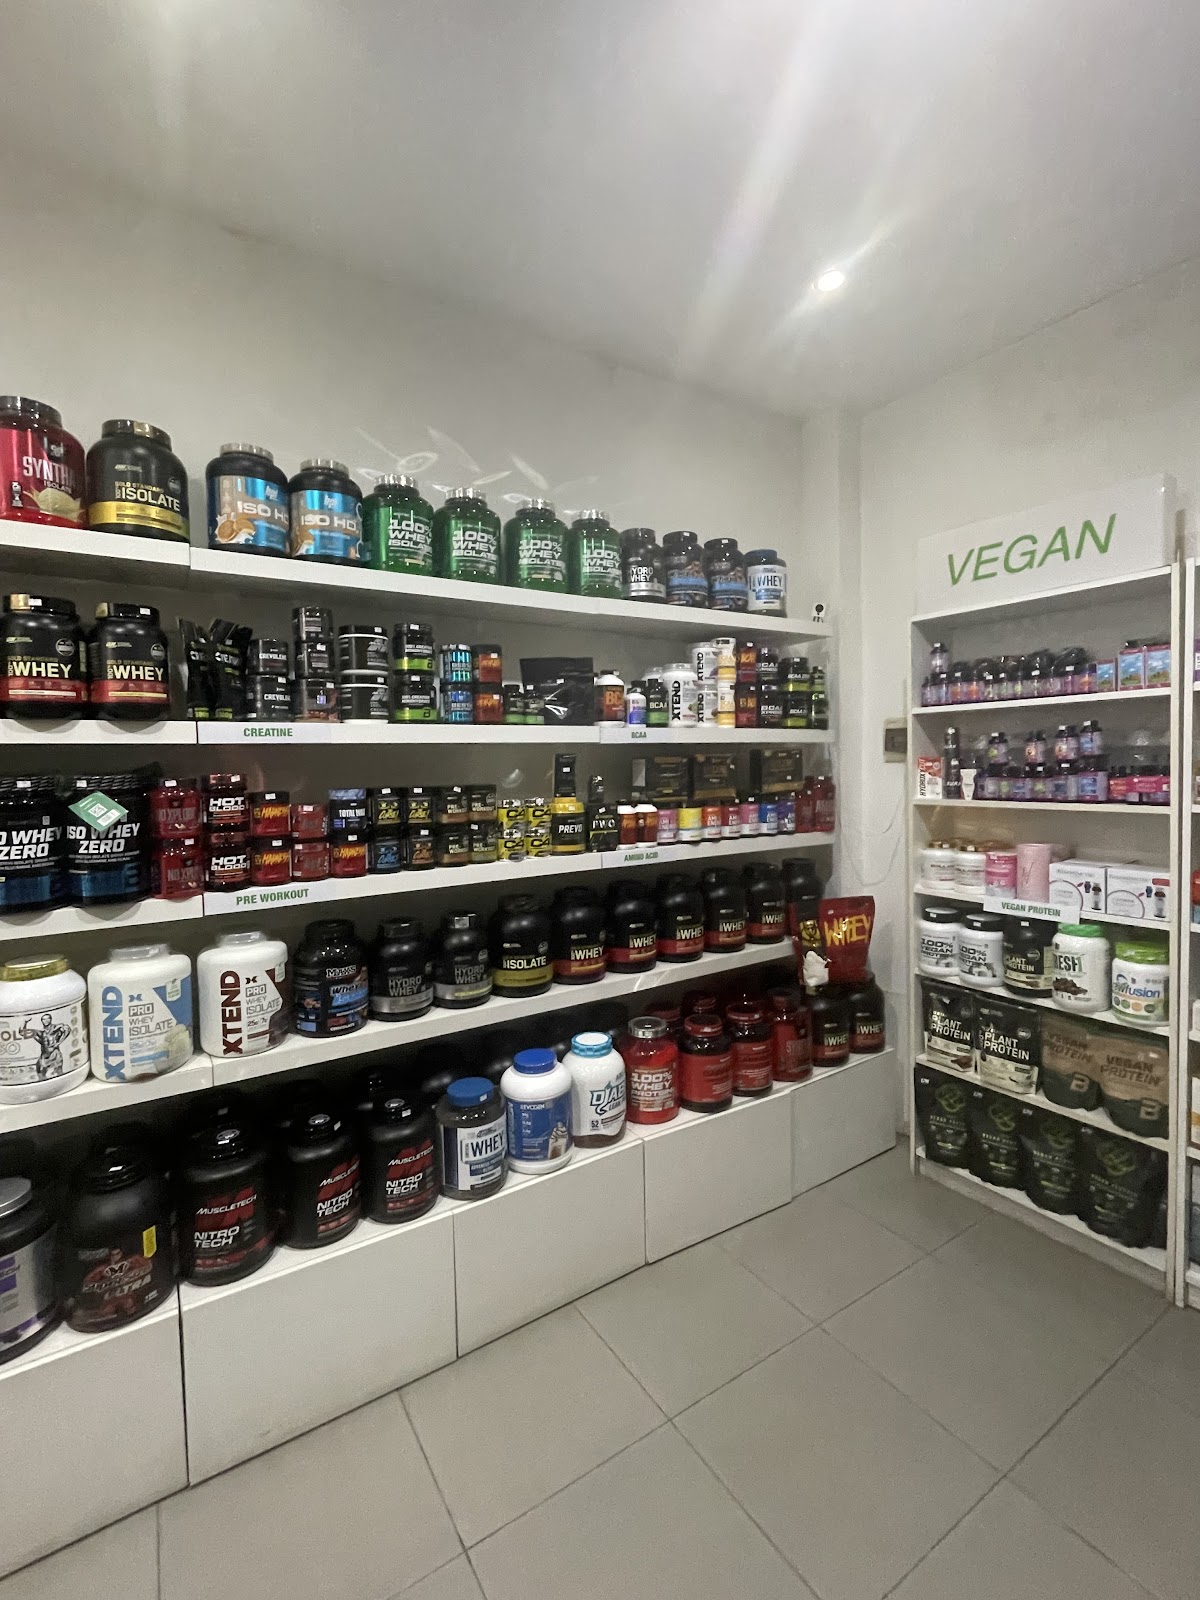 Mogann Fitness and Health Supplements